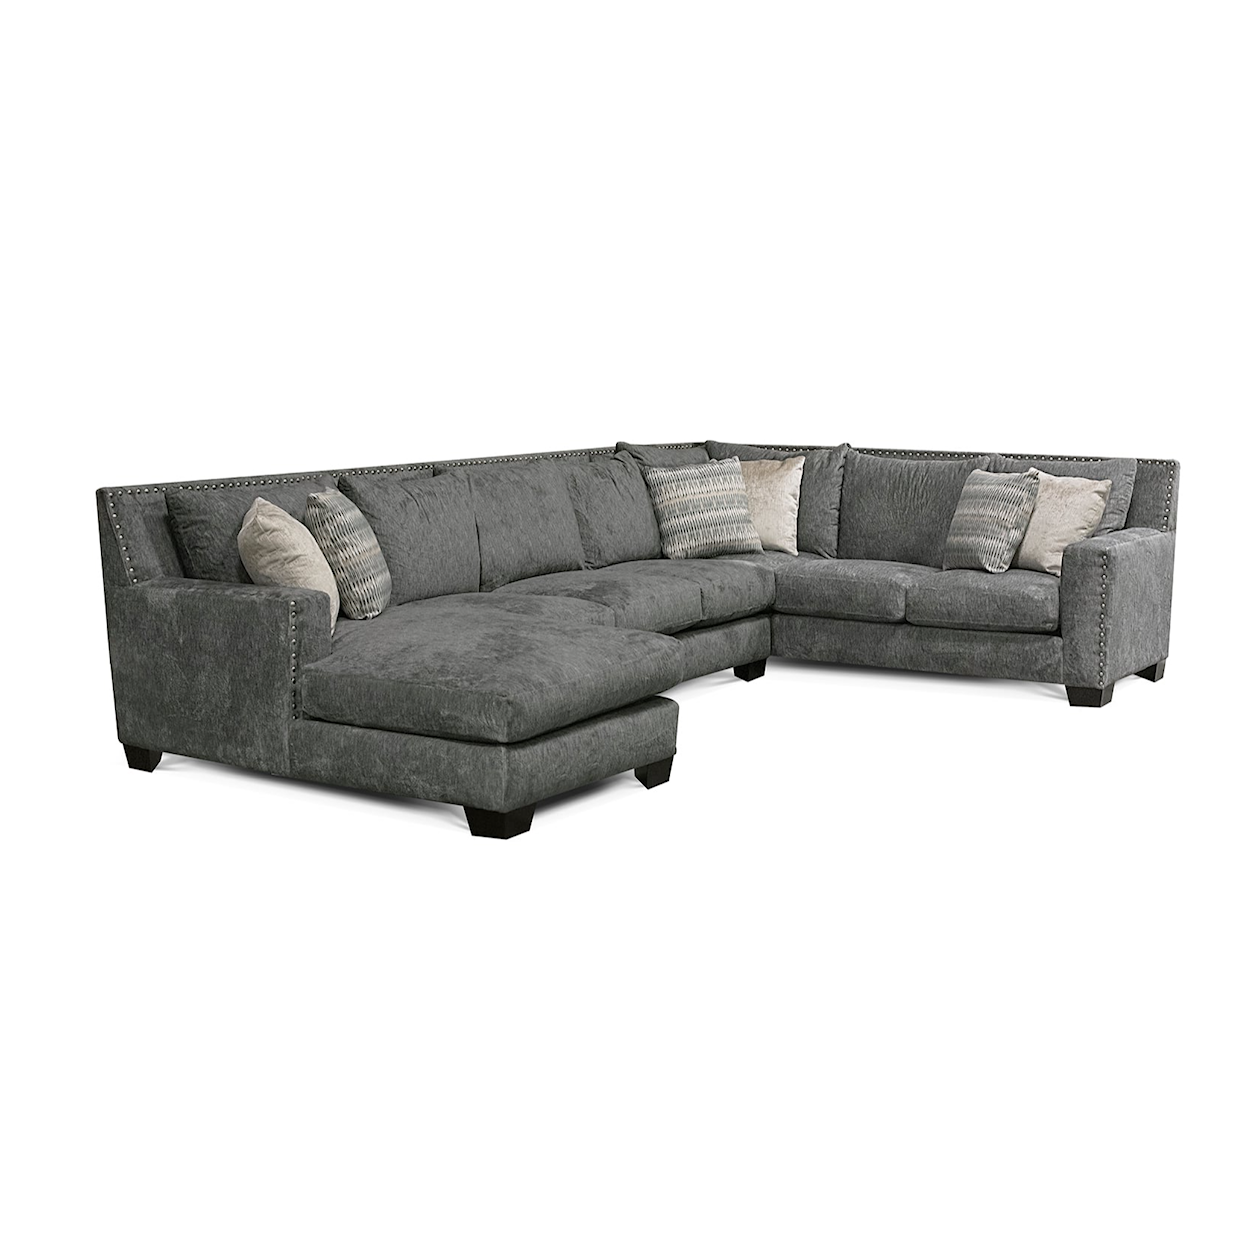 Dimensions 7K00/N Series Sectional Sofa with Chaise